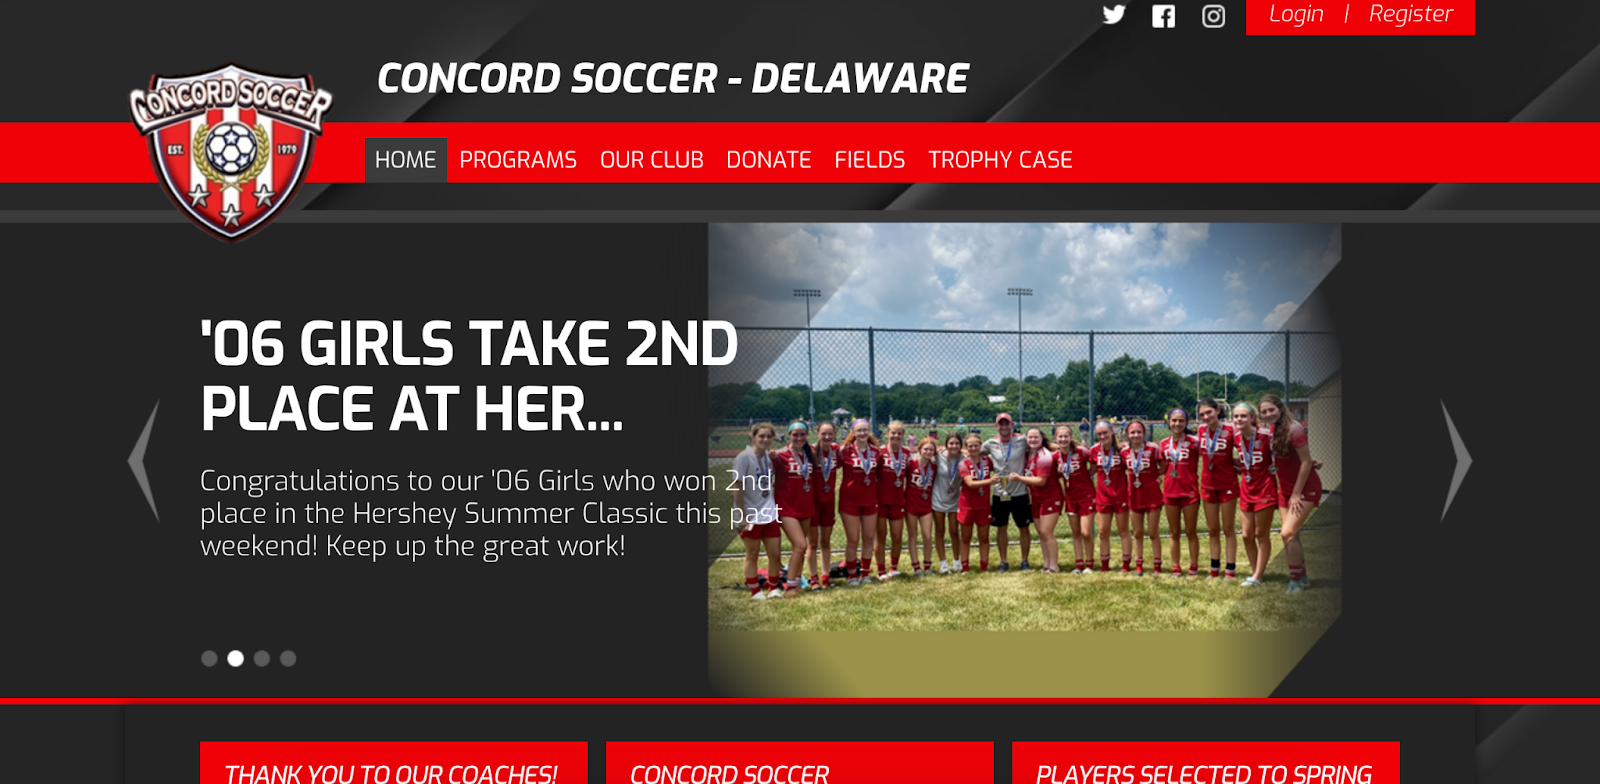 One of the best Delaware Soccer Clubs